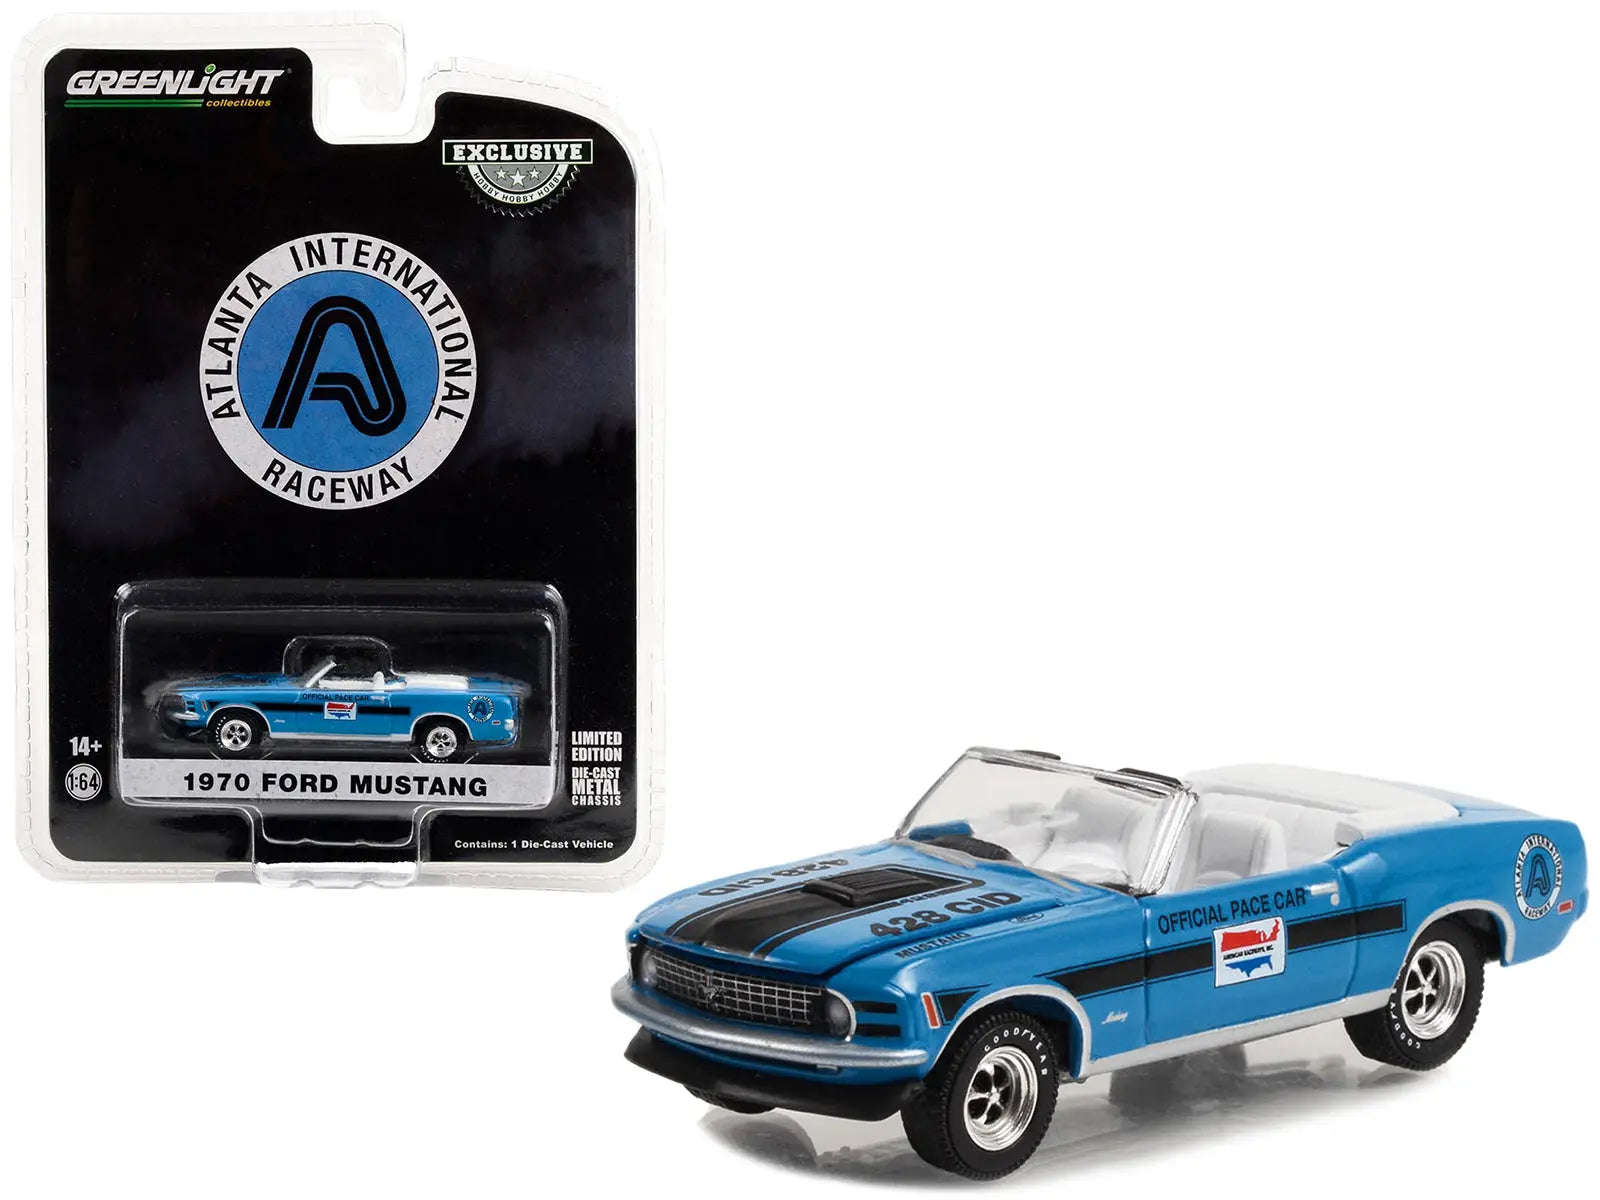 1970 Ford Mustang Mach 1 428 Cobra Jet Convertible "Atlanta International Raceway Official Pace Car" "Hobby Exclusive" Series 1/64 Diecast Model Car by Greenlight Greenlight